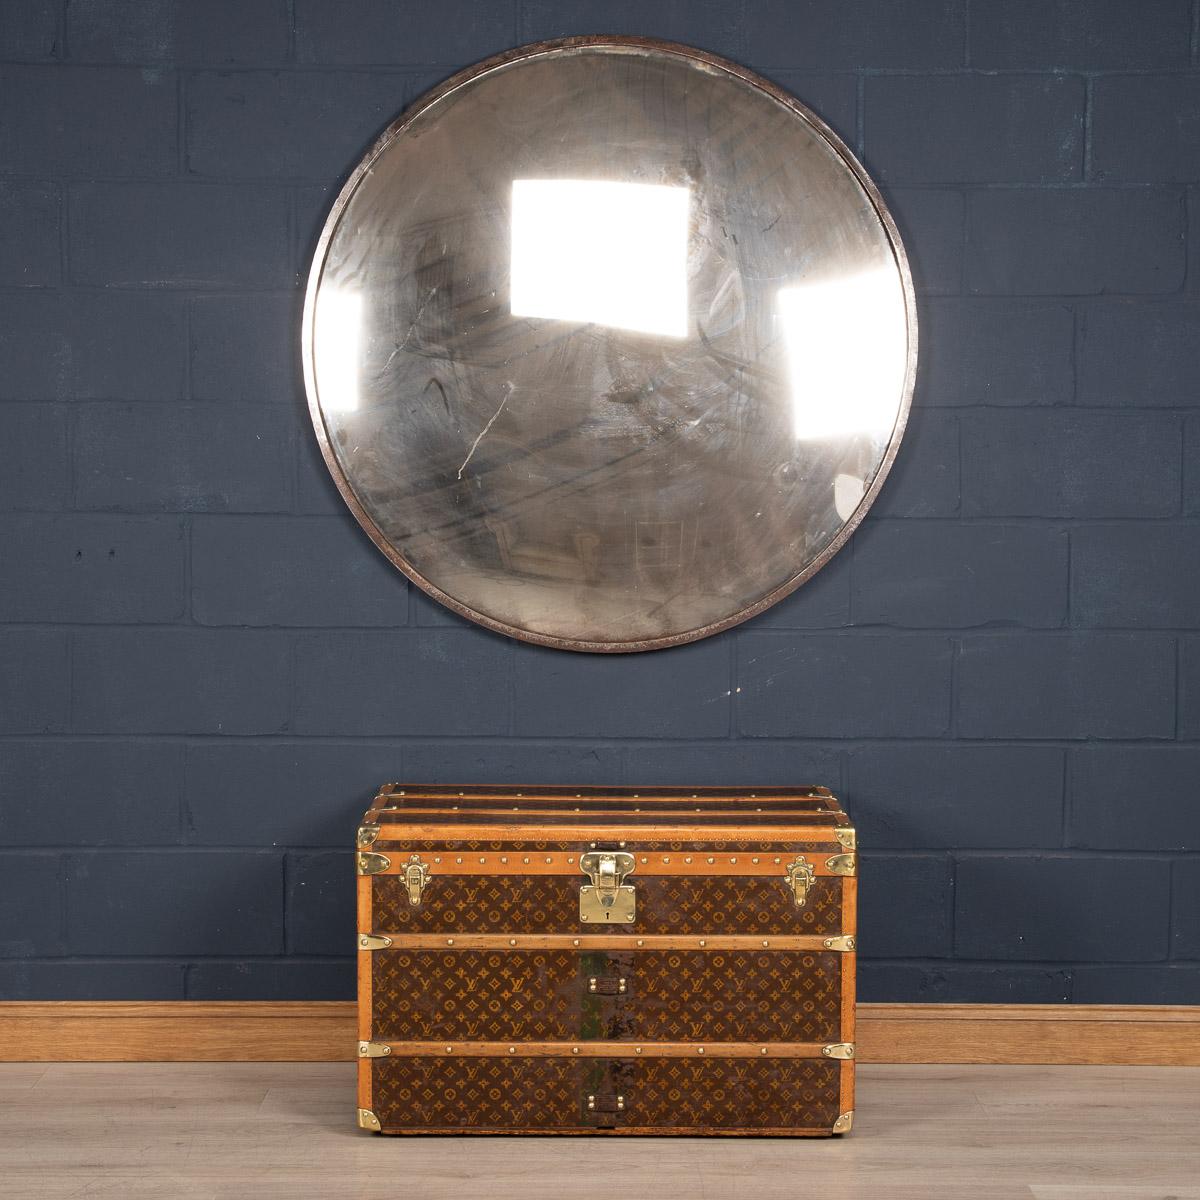 One of the most dramatic pieces of interior design furniture for any home, this railway mirror was manufactured in Czechoslovakia around the middle of the last century. Measuring an impressive 125cm in diameter, it is slightly convex (fish-eyed) to